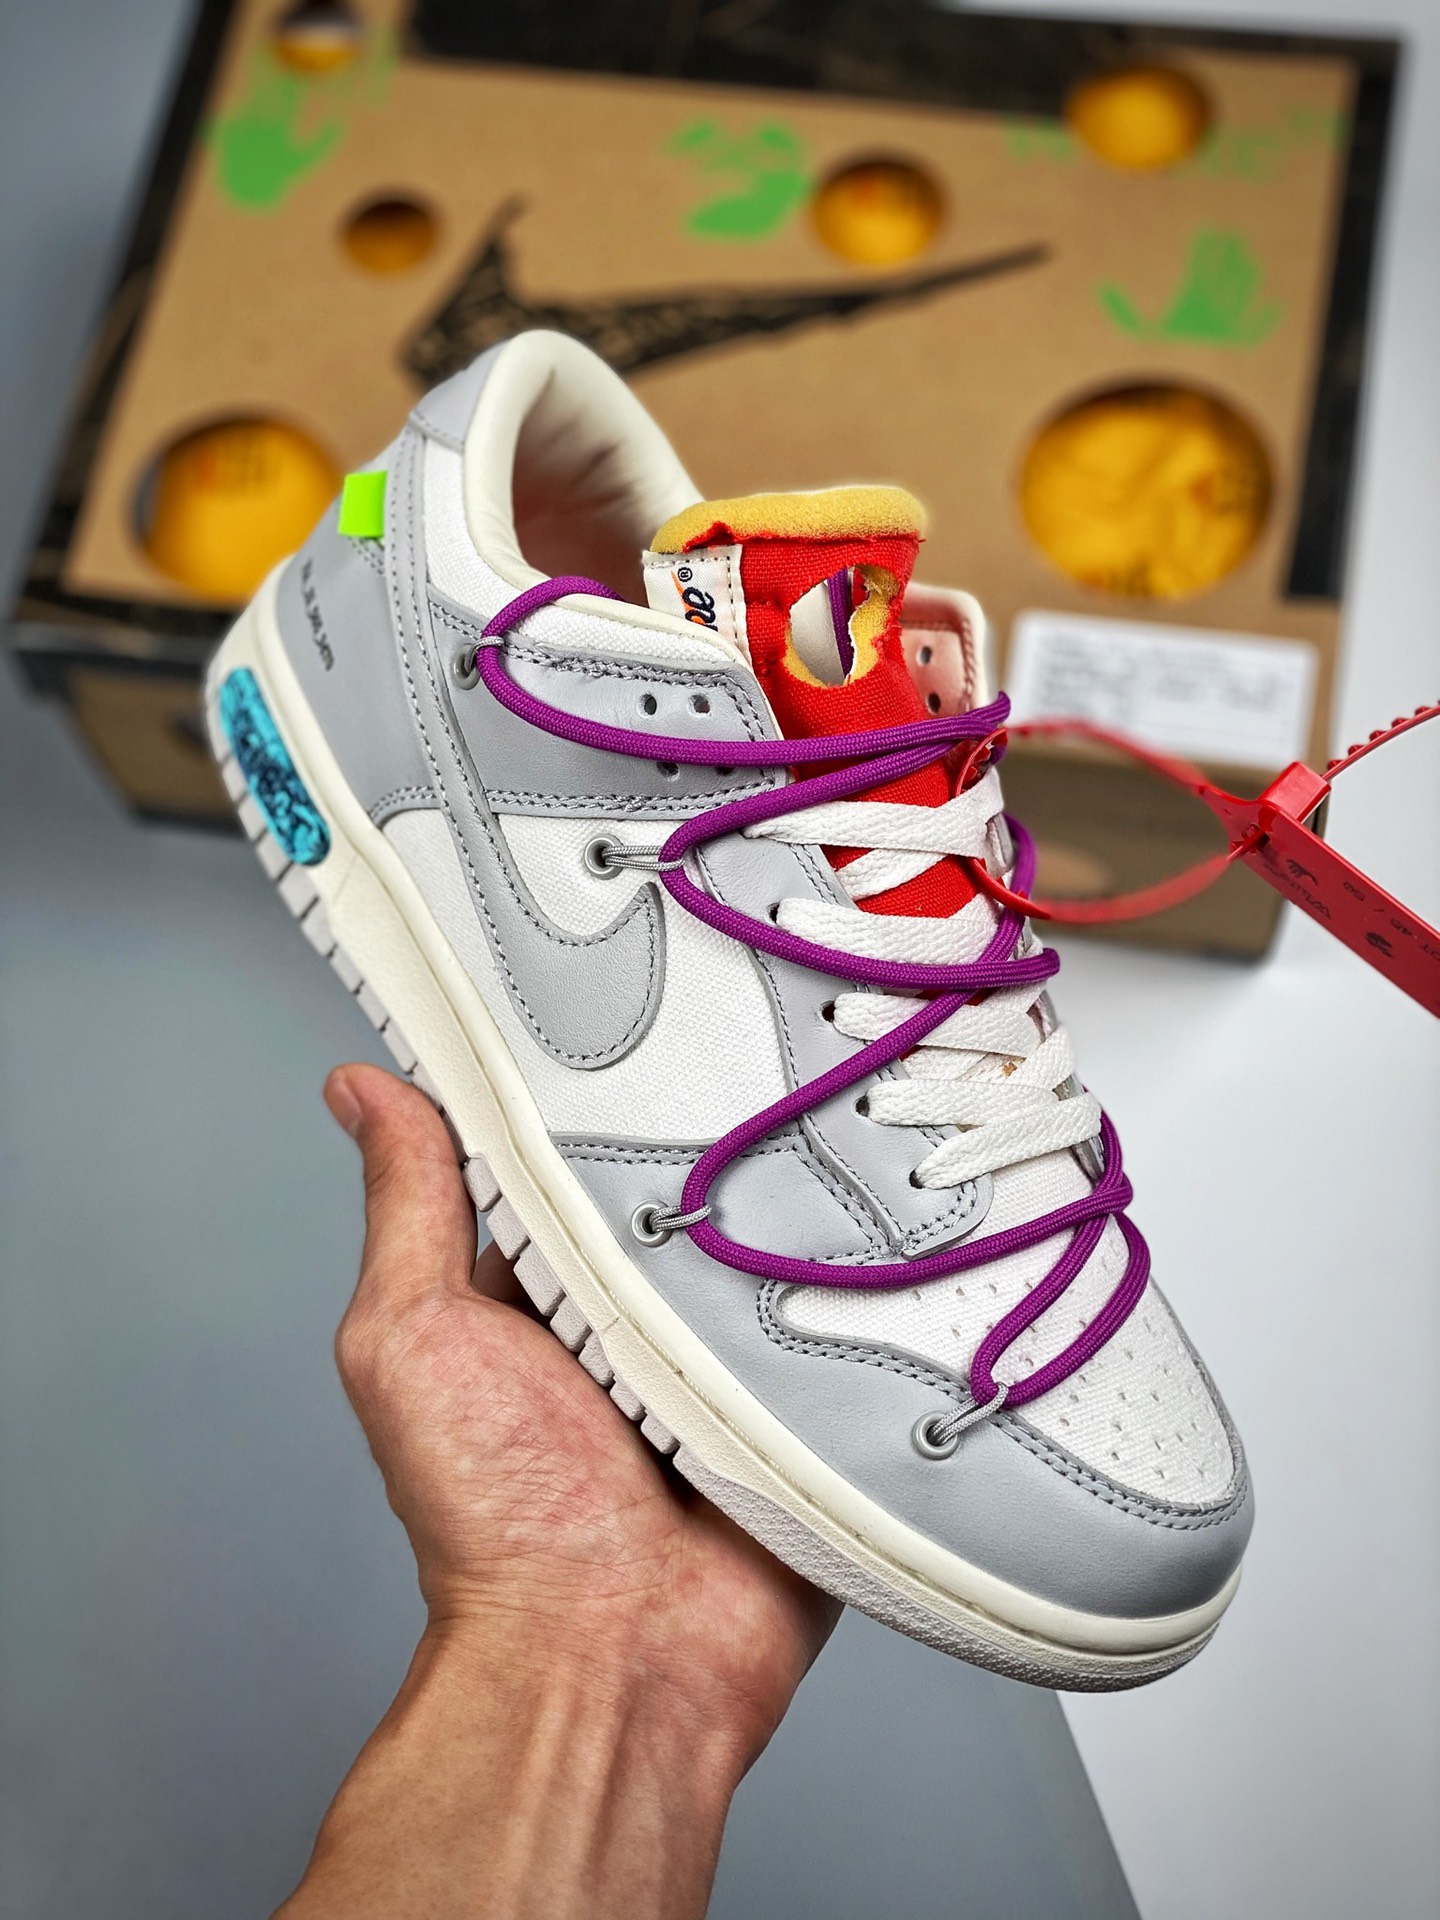 Off-White x Nike Dunk Low “45 of 50” Sail Grey Magenta For Sale ...